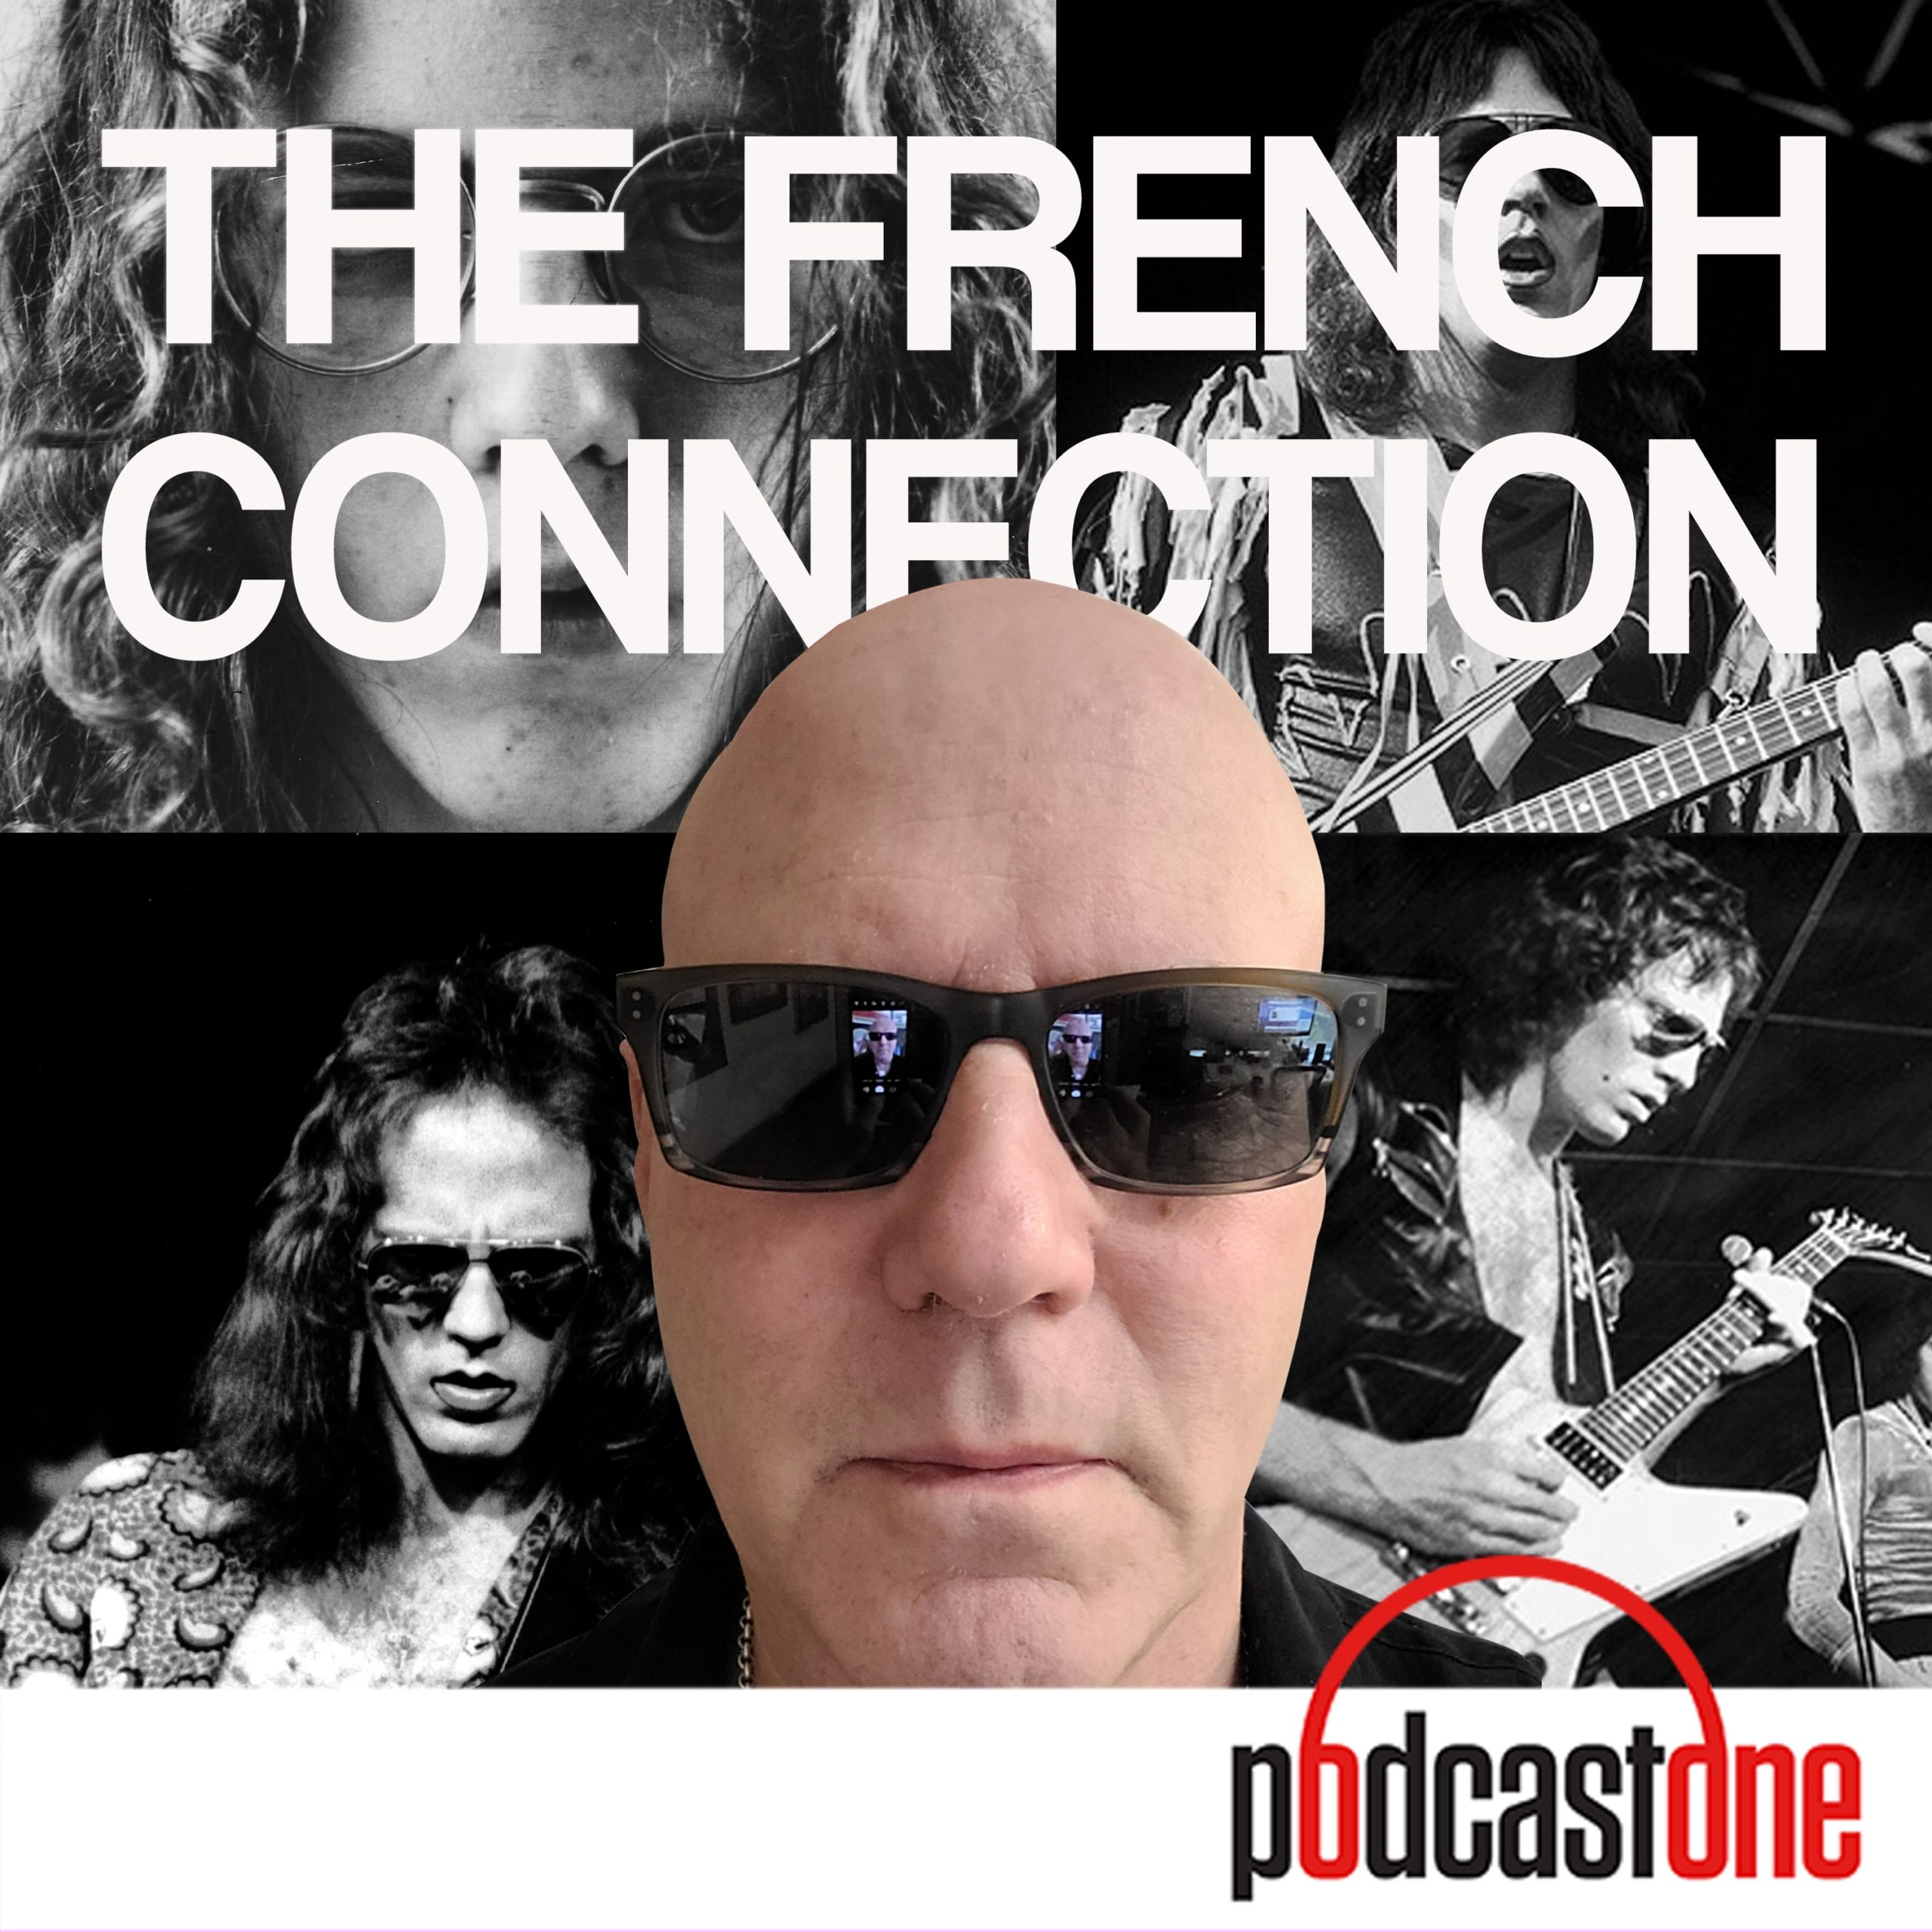 The Jay Jay French Connection, épisodes 101-105